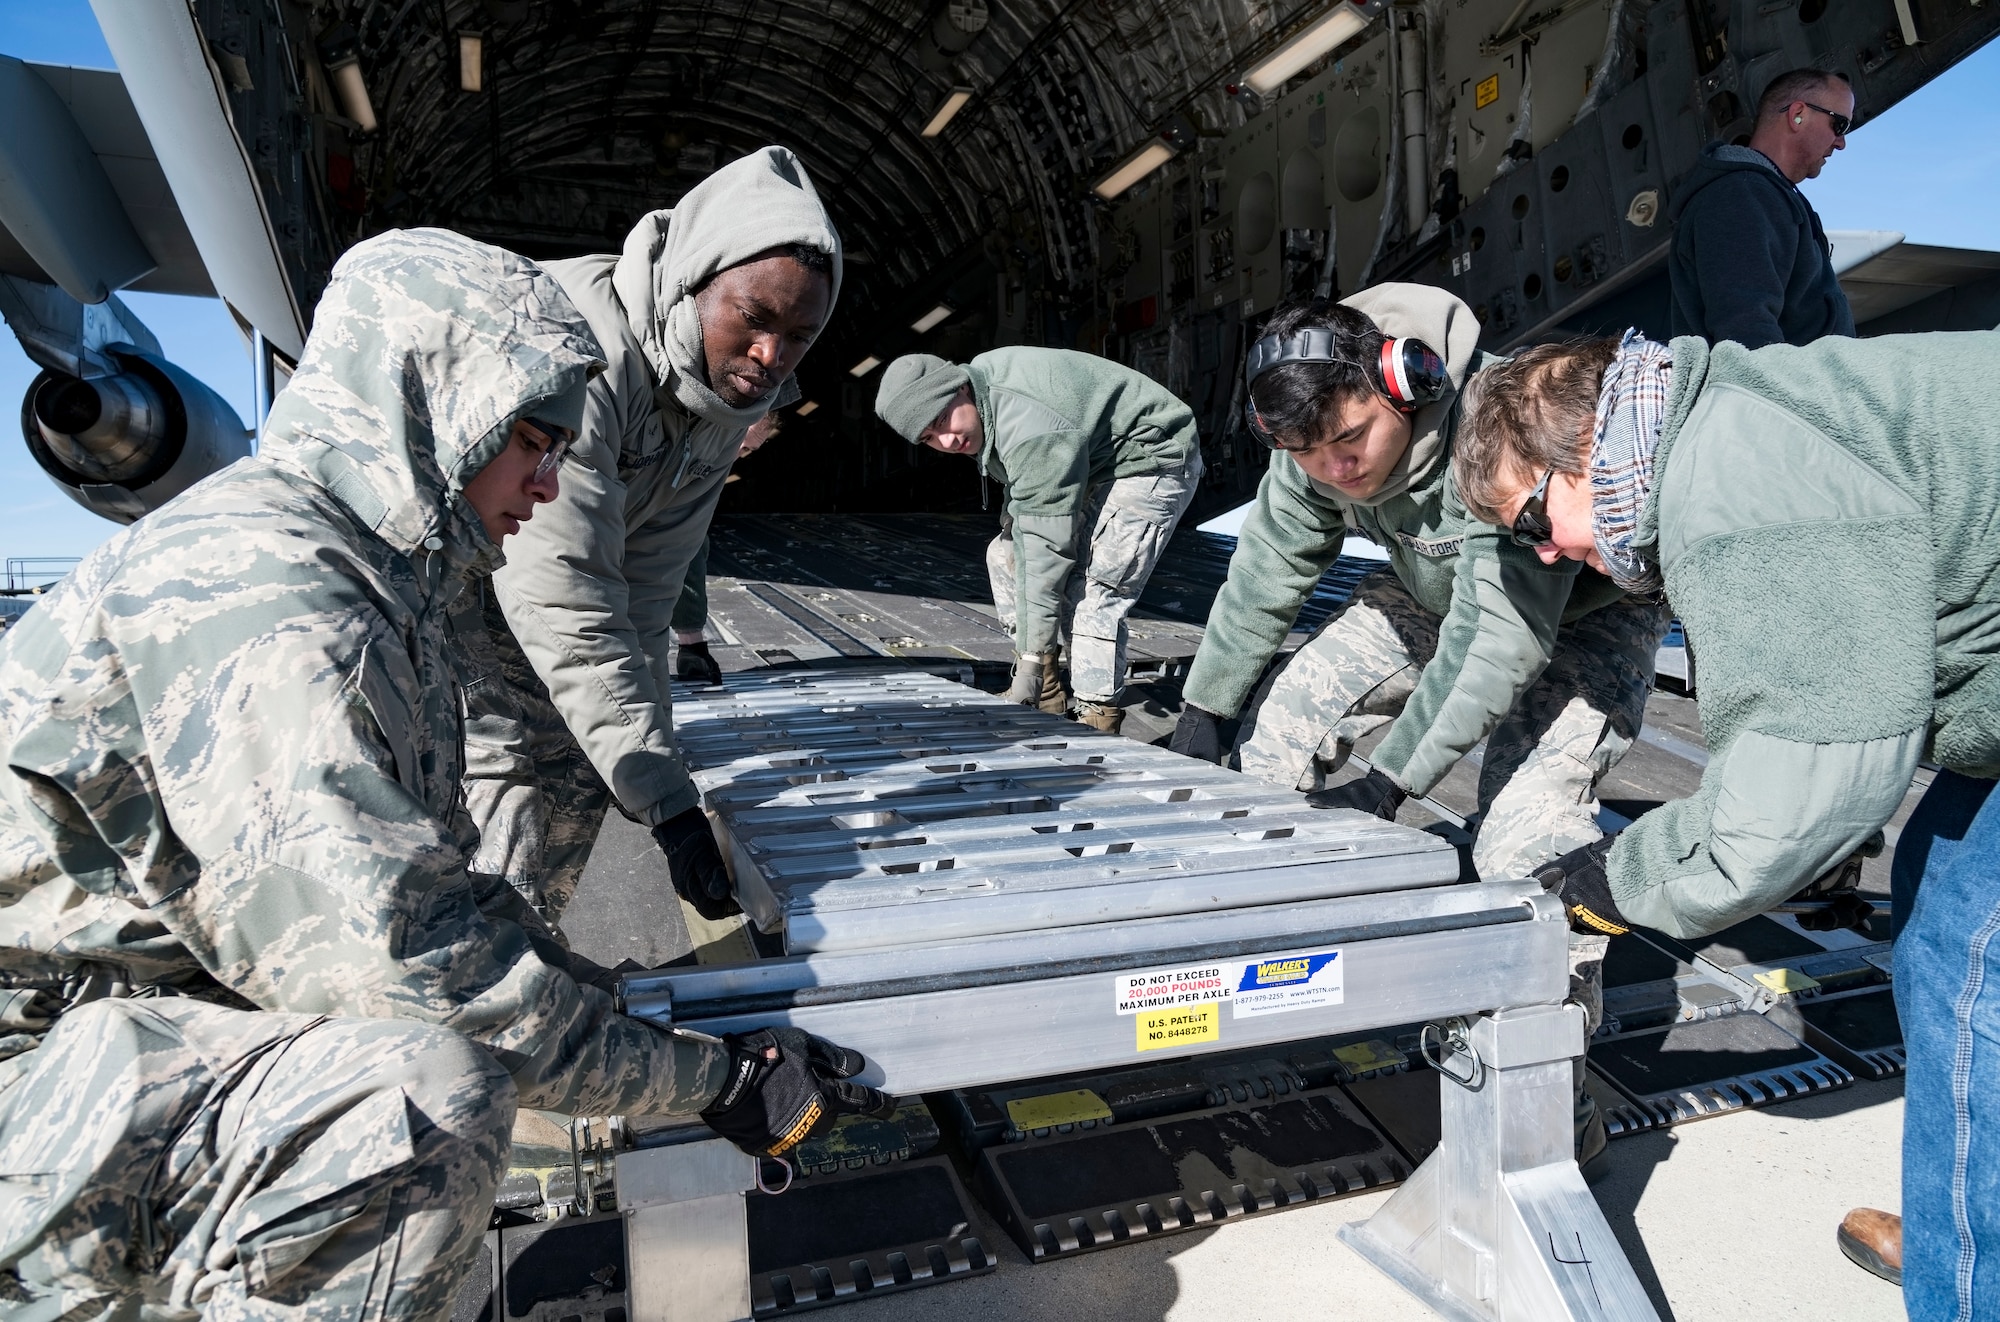 Ramp operations personnel assigned to the 436th Aerial Port Squadron assemble the ramp sections of DOMOPS Airlift Modular Approach Shoring Jan. 11, 2019, at Dover Air Force Base, Del. The modular shoring was used to upload five vehicles belonging to the Delaware National Guard's 31st Civil Support Team, Weapons of Mass Destruction headquartered in Smyrna, Del.